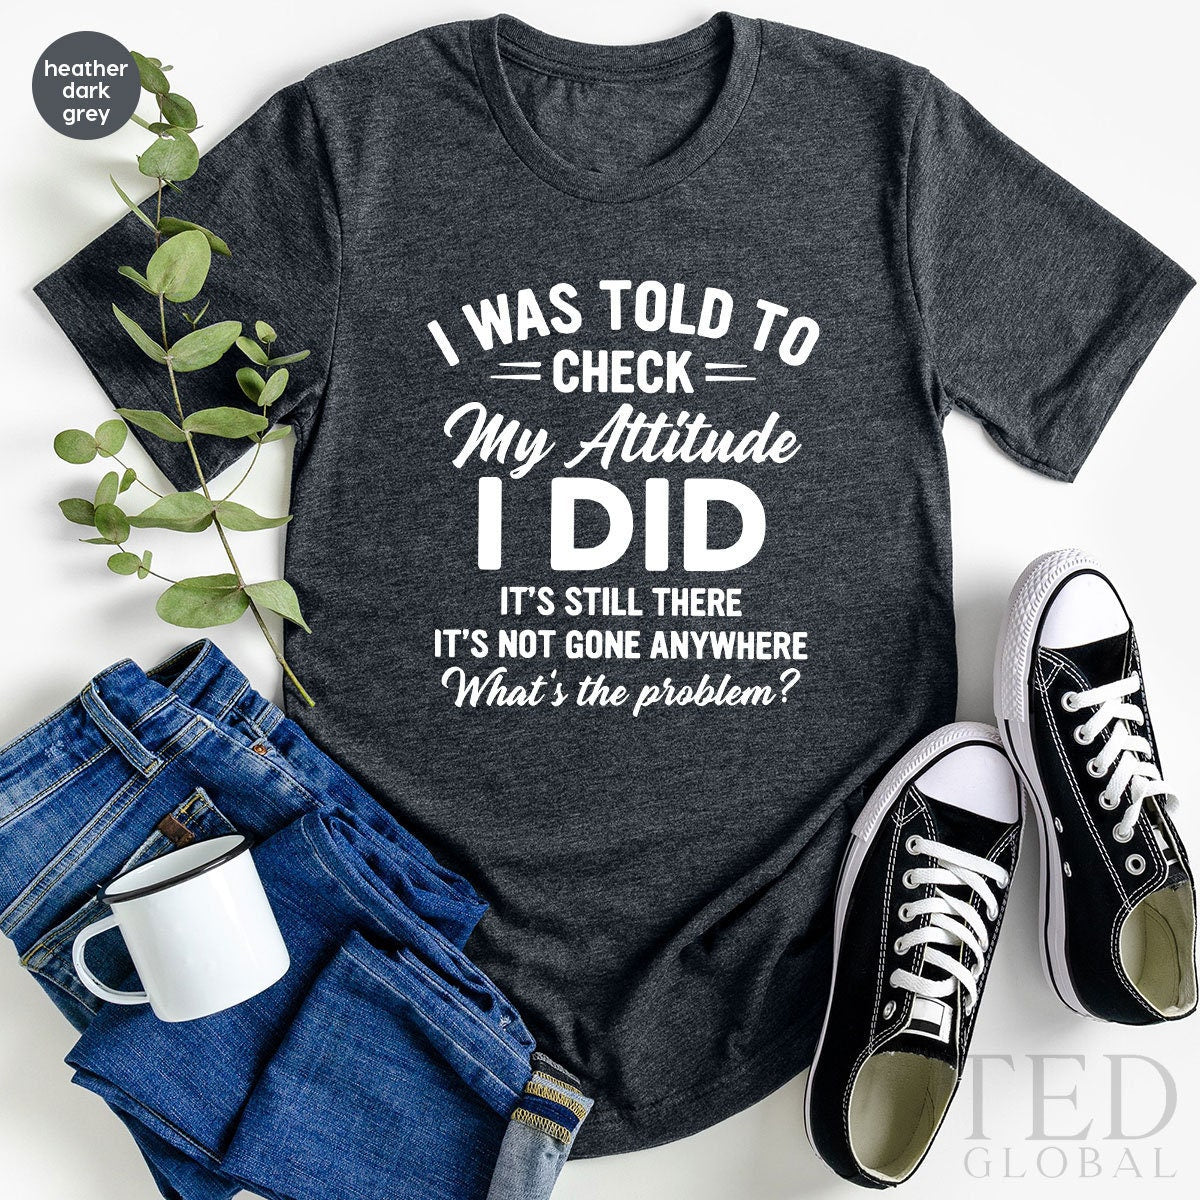 Adult Humor Shirt, I Was Told To Check My Attitude, Humorous Shit, Fun –  Fastdeliverytees.Com